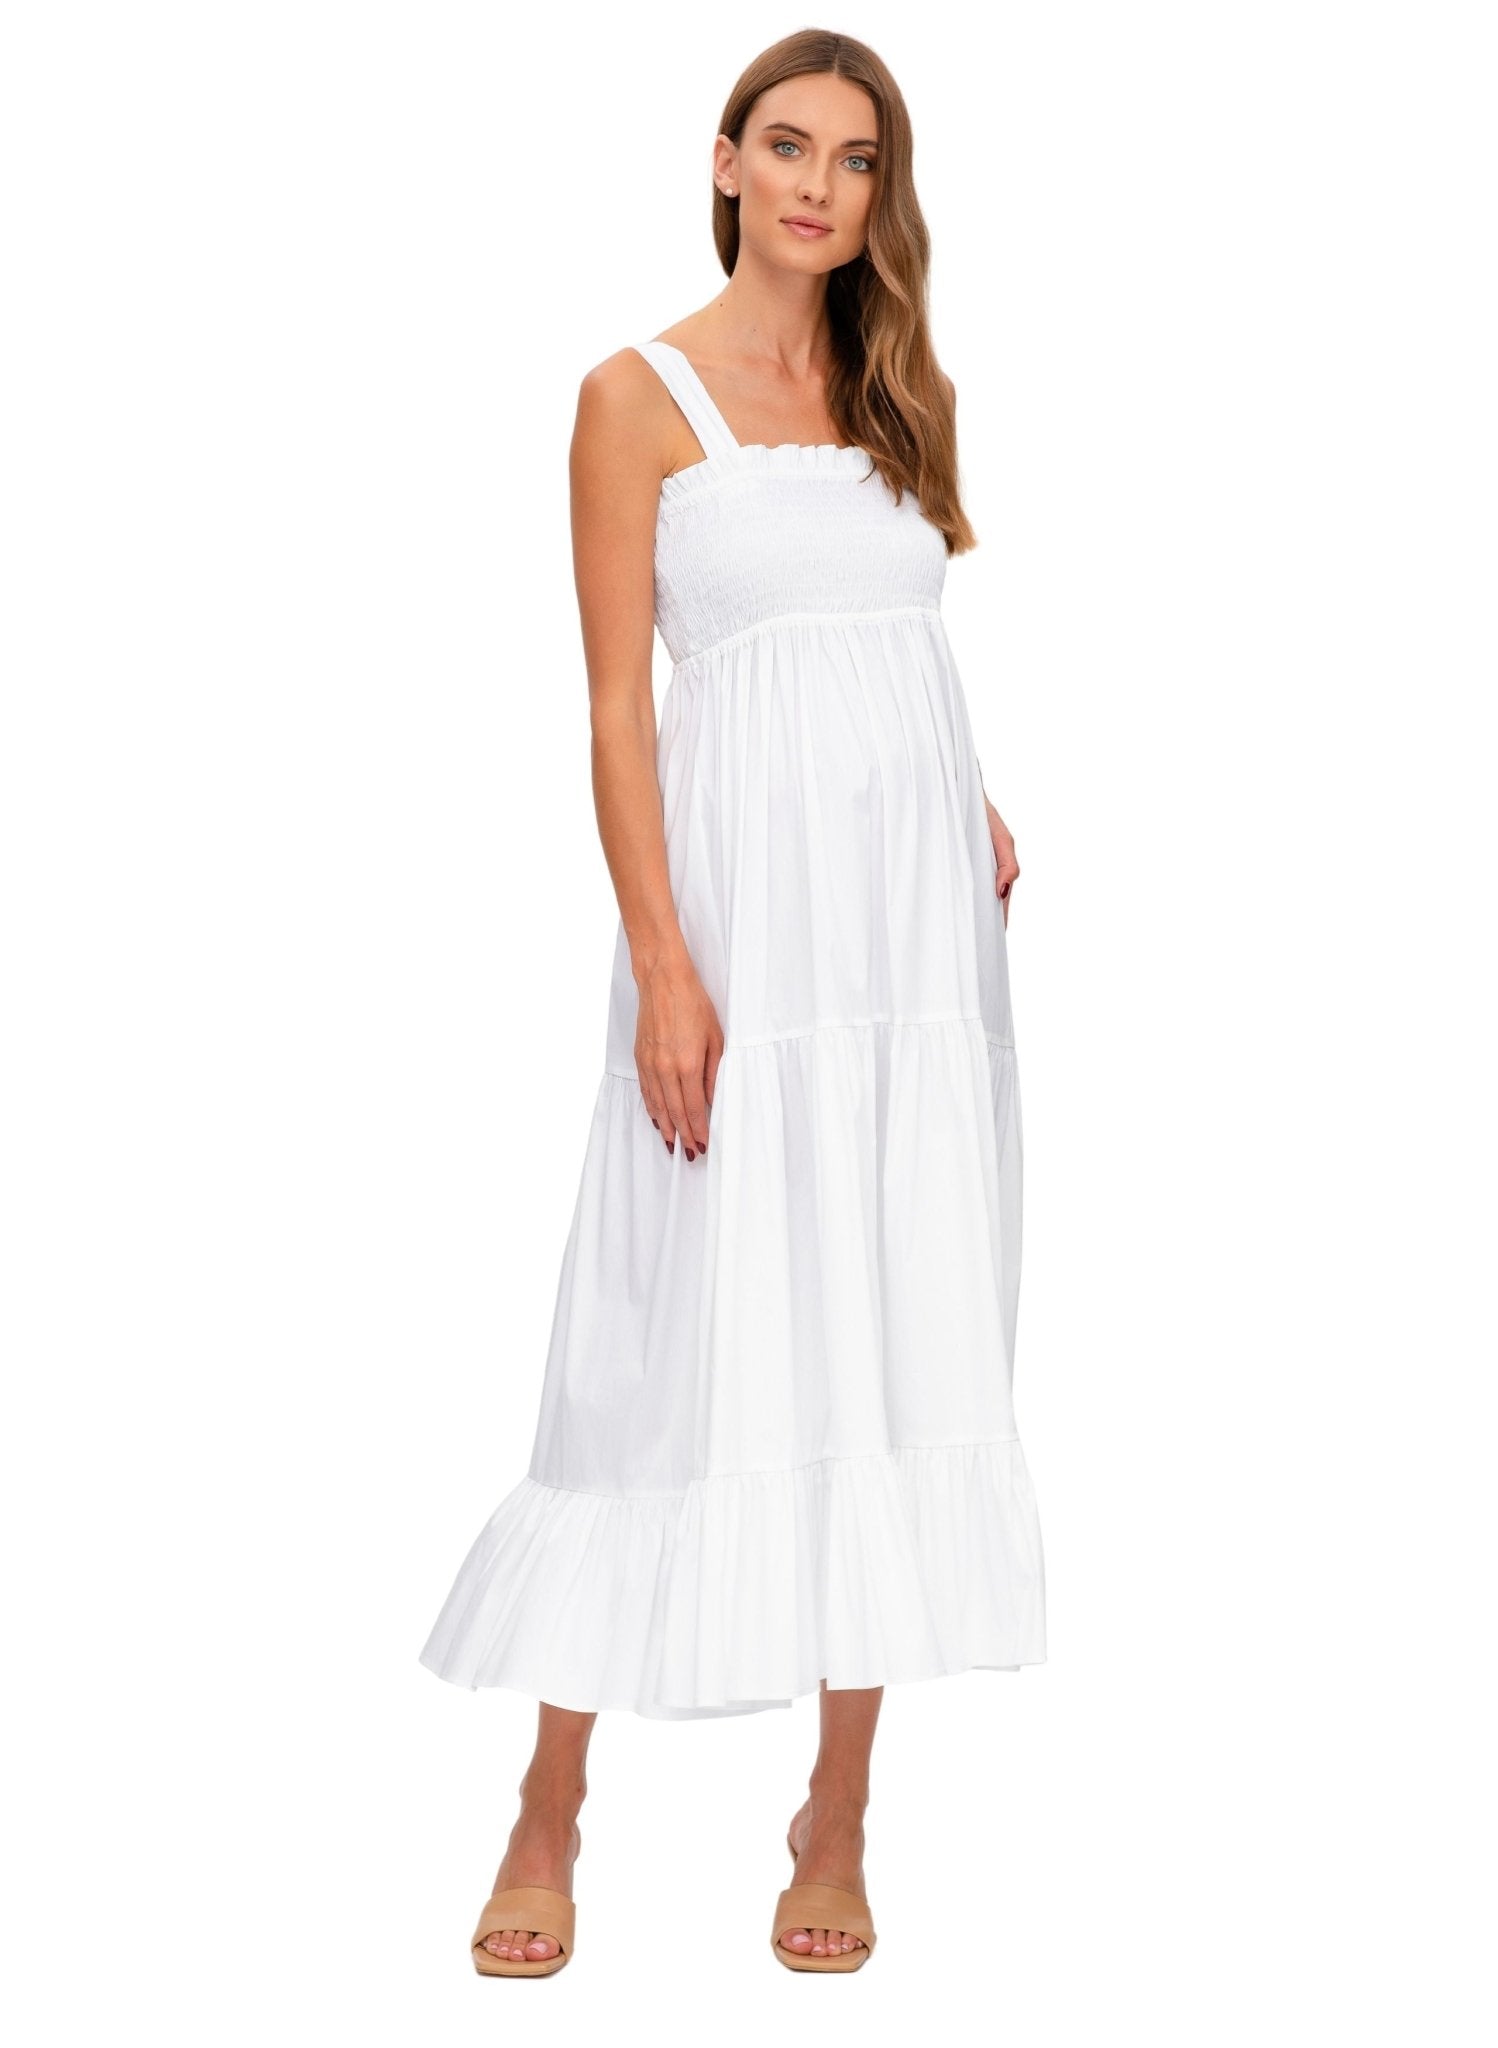 Holly Long Maternity Dress - Optical White - Mums and Bumps